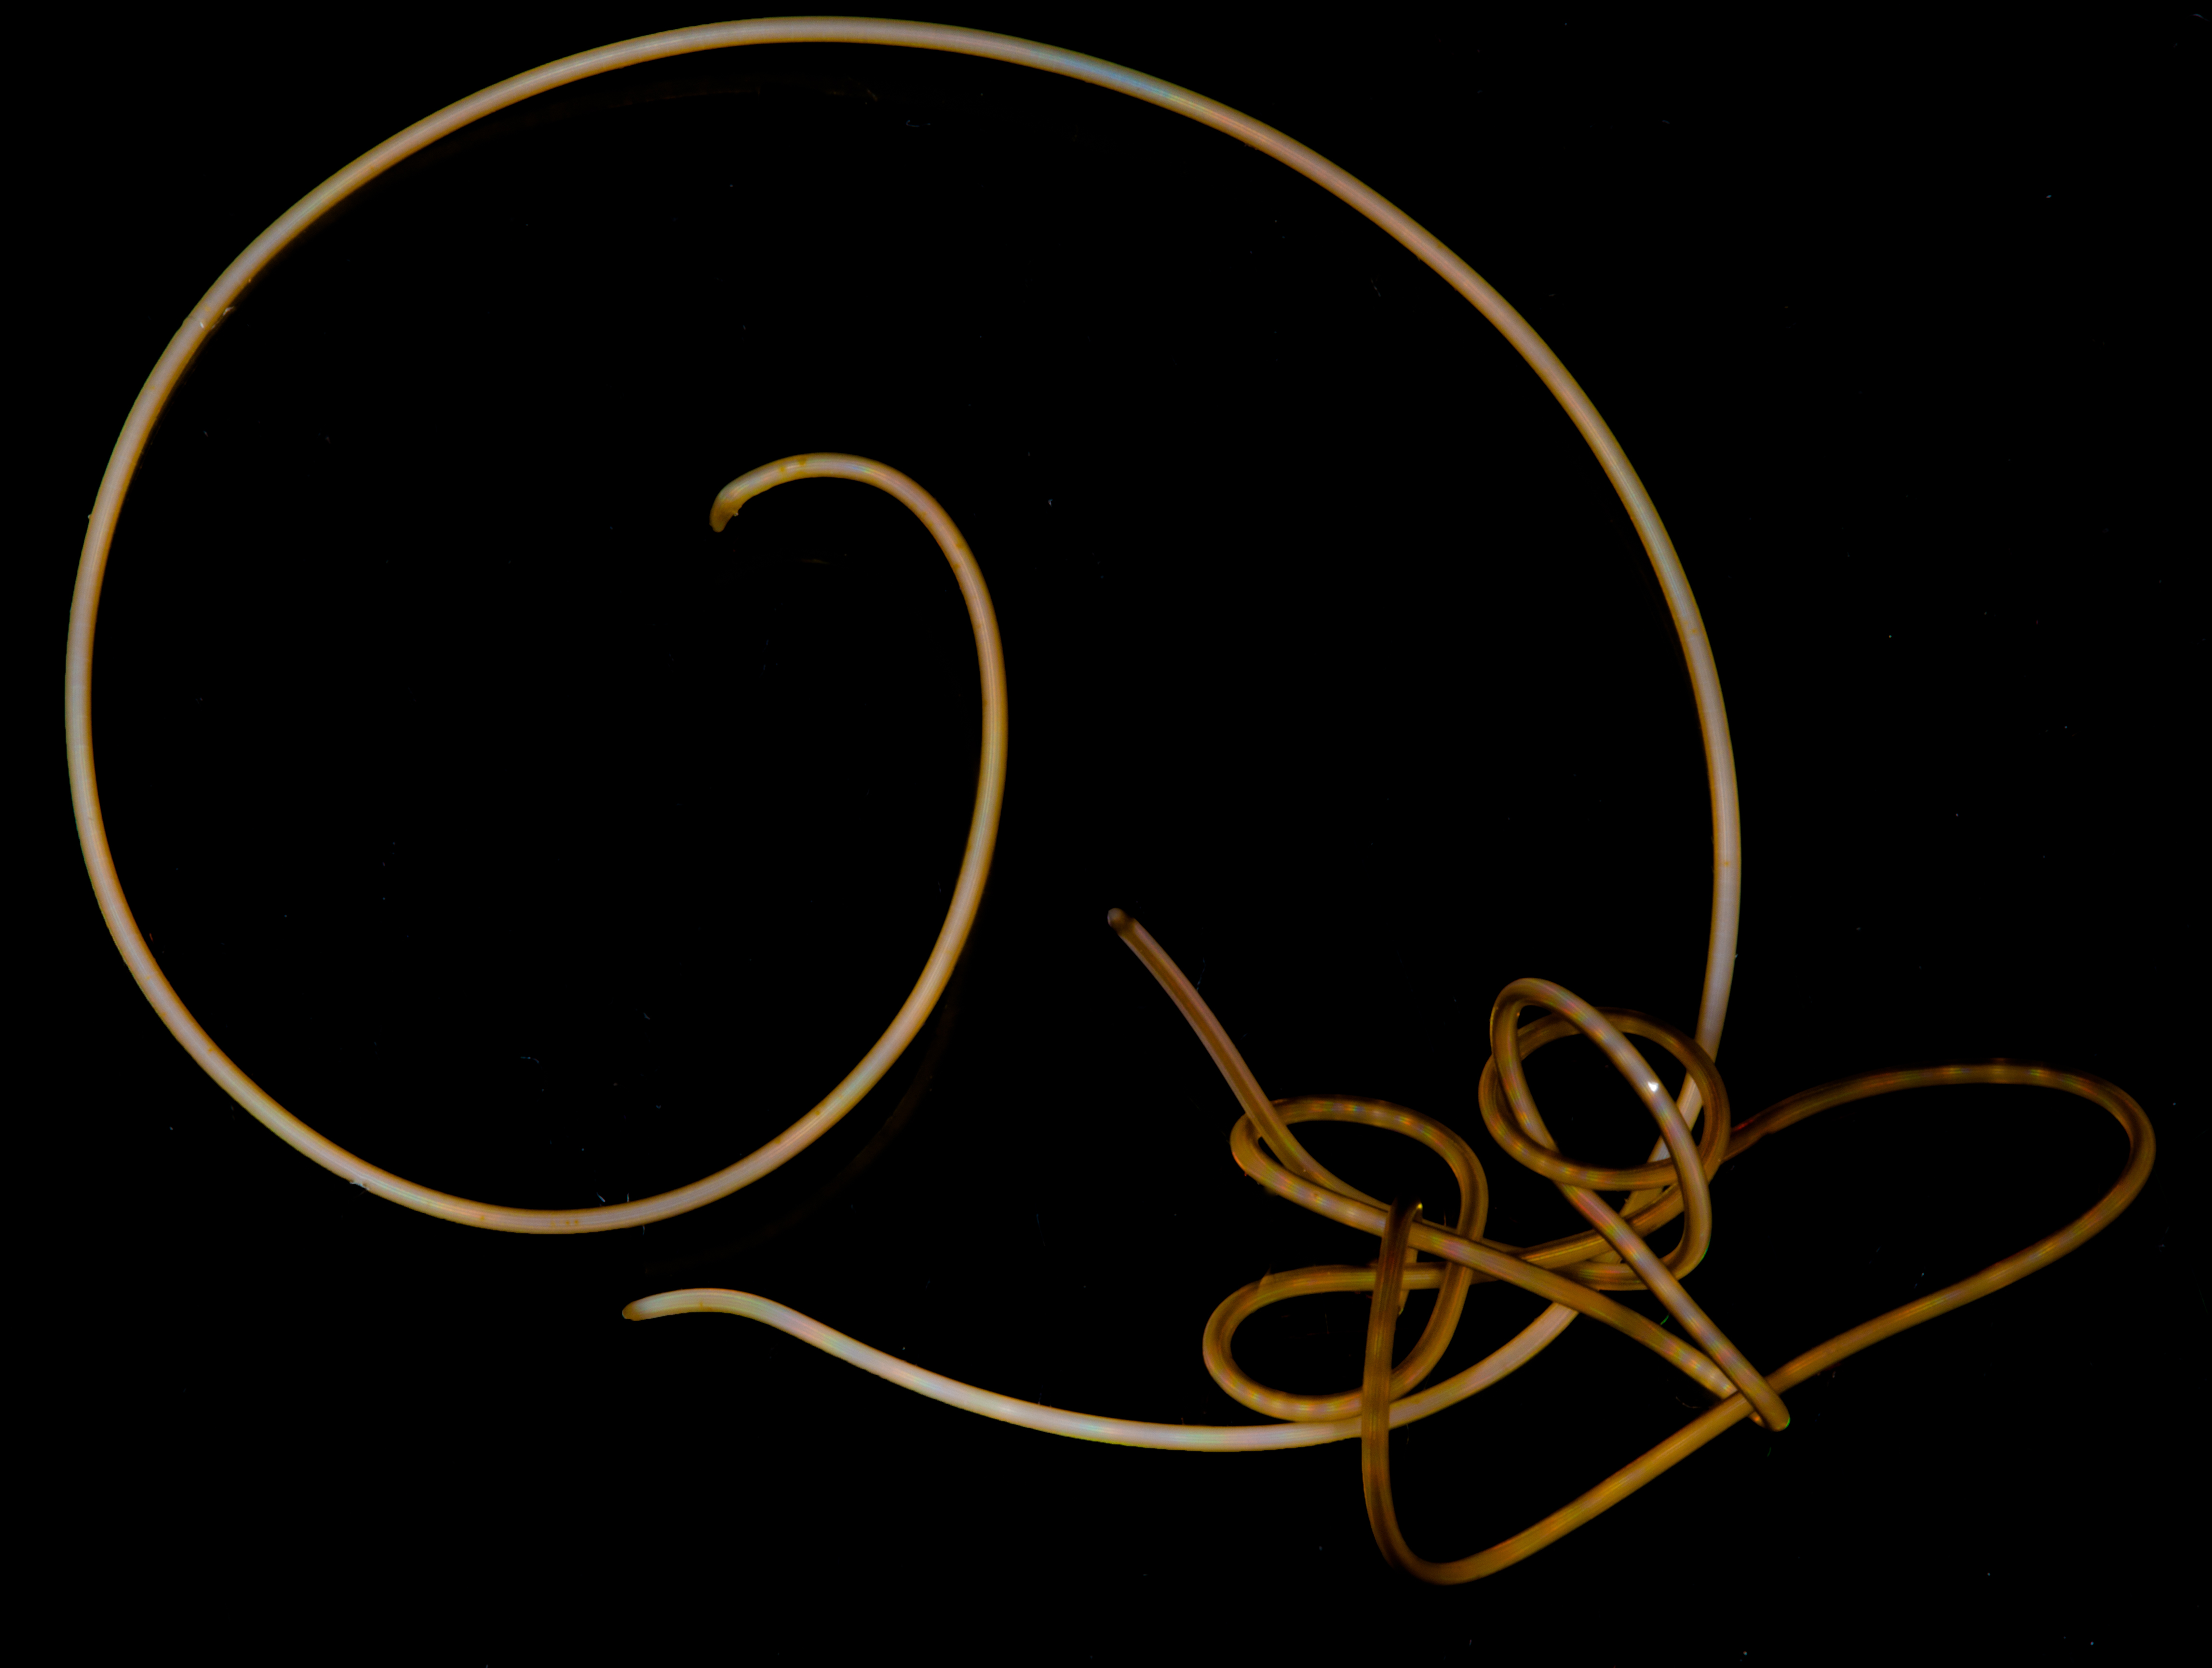 two long, thin, light-colored worms entangled together